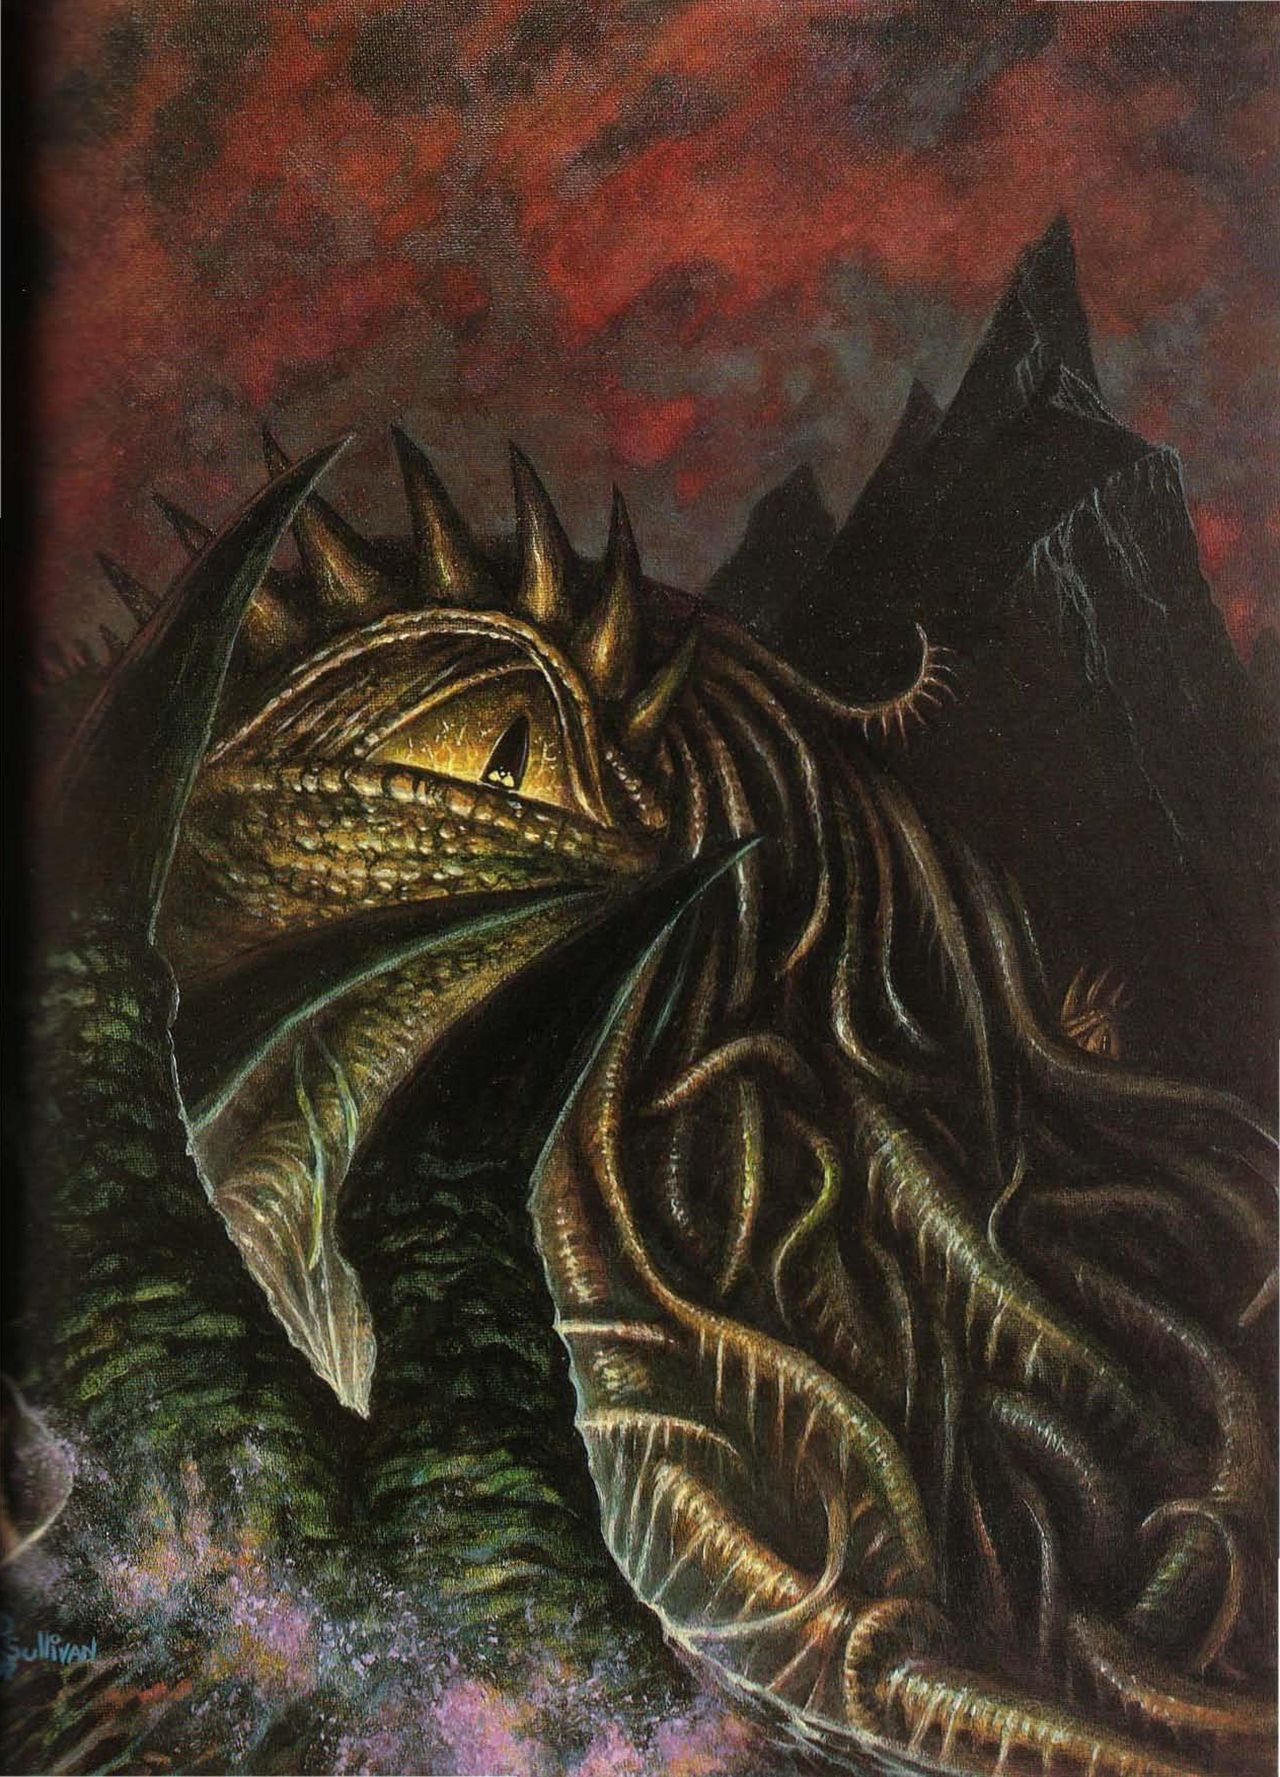 S. Petersen's Field Guide to Cthulhu Monsters 14